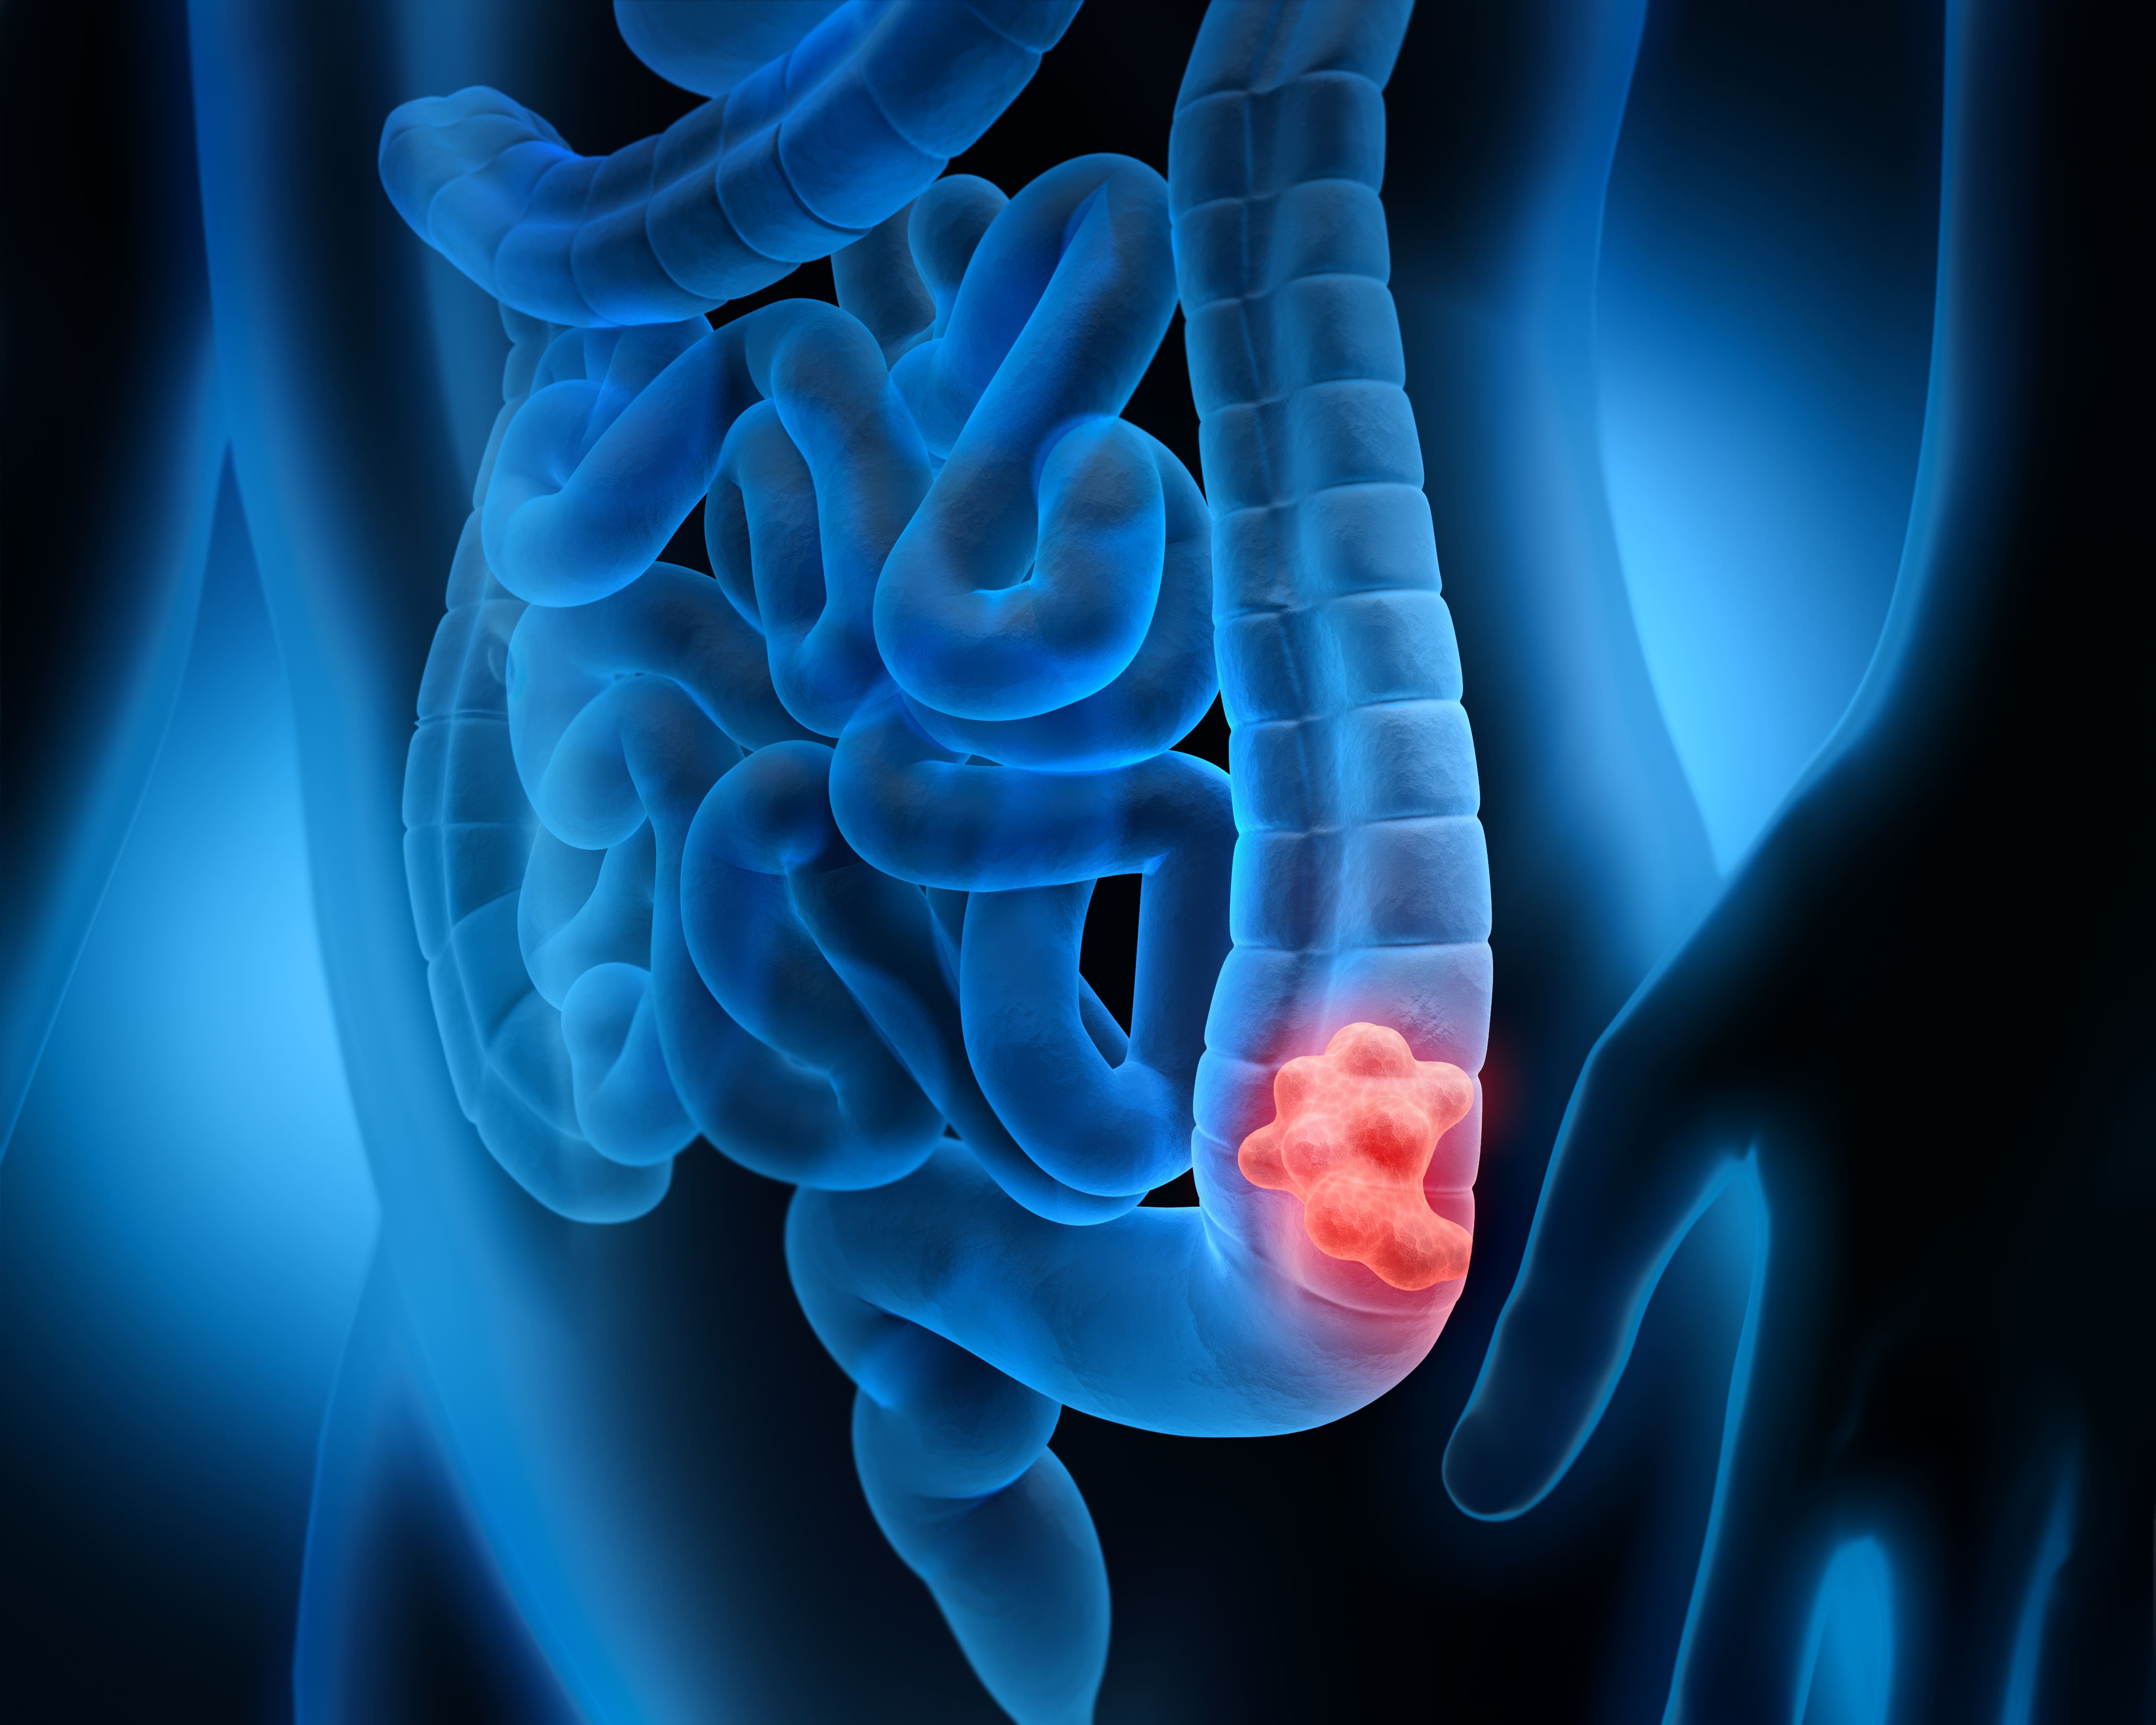 What Symptoms of Colon Cancer Emerge in Men and Women?